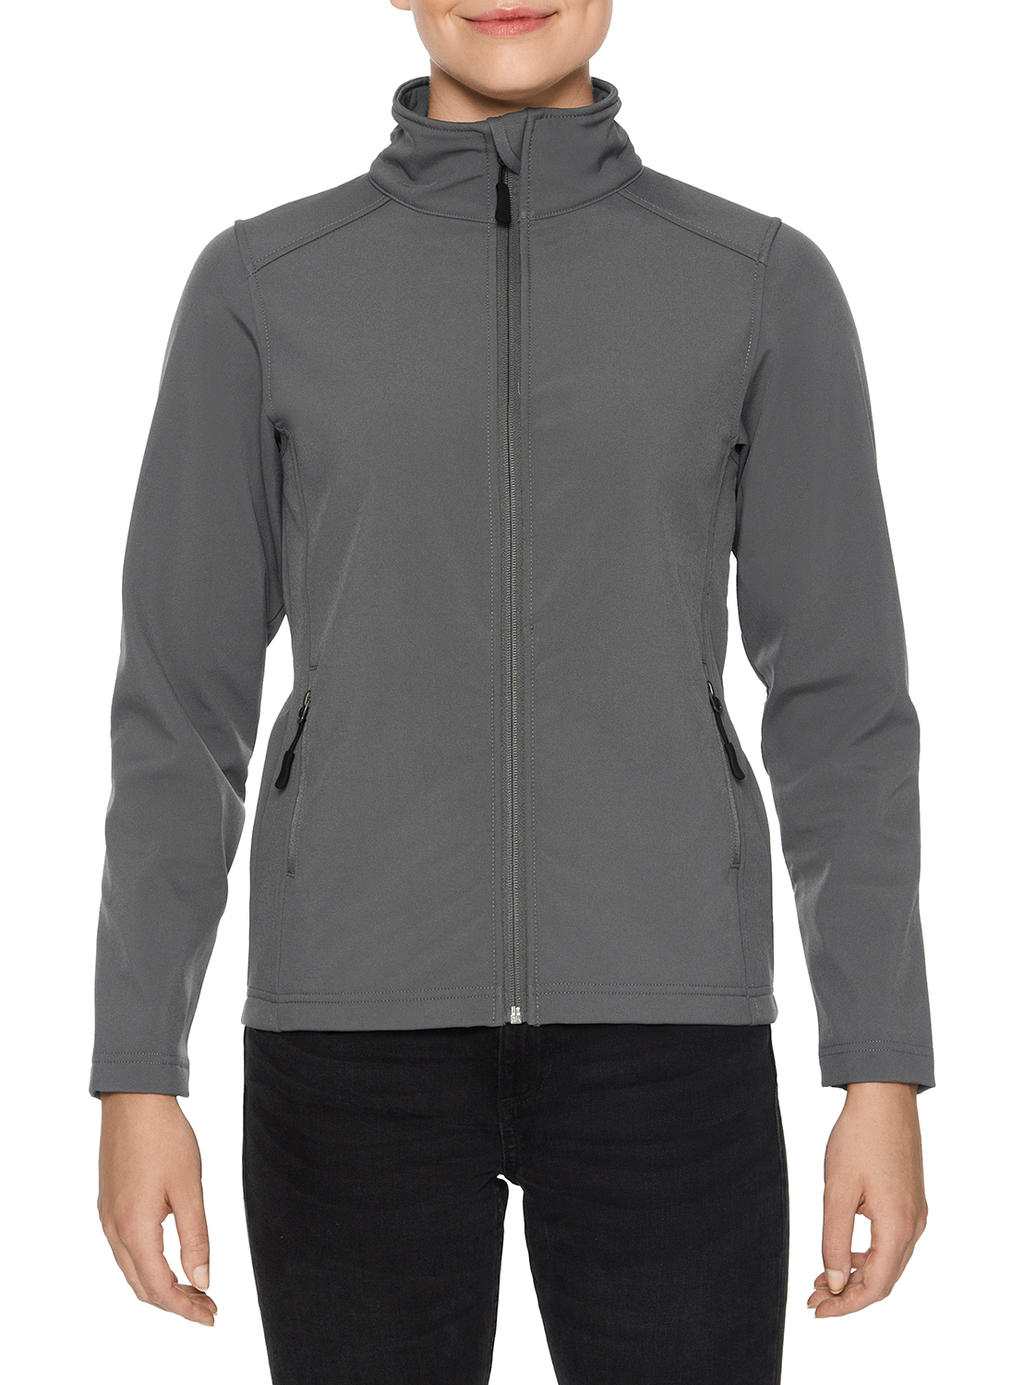  Hammer? Ladies Softshell Jacket in Farbe Charcoal